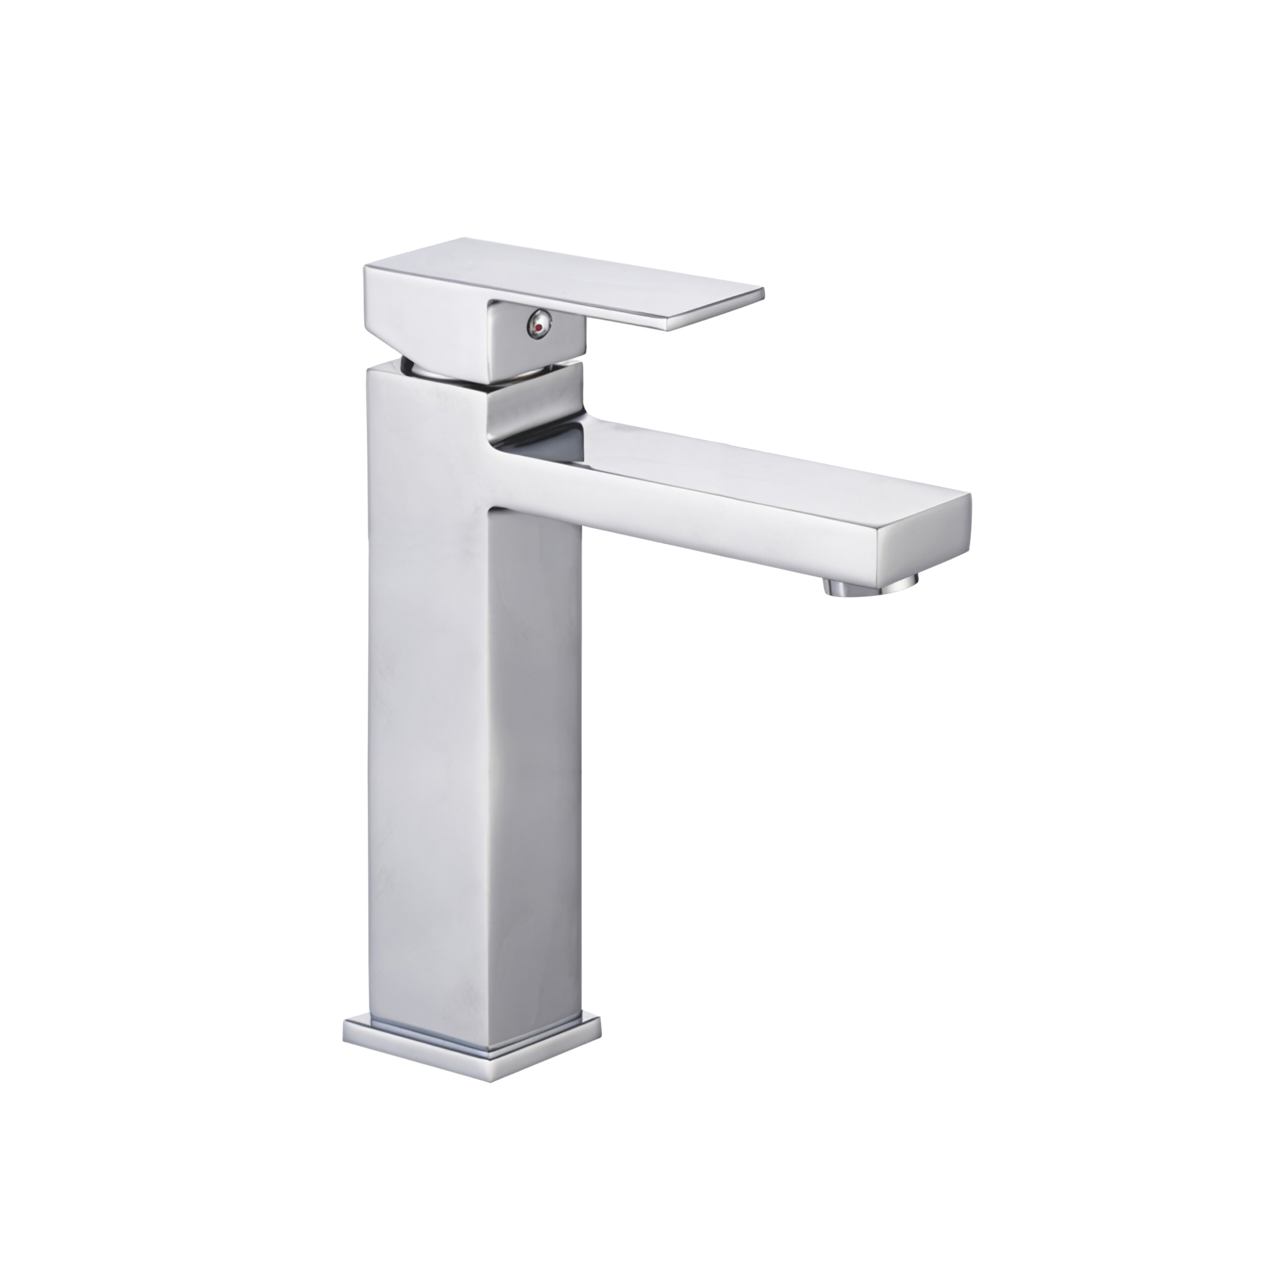 OJ-J2552H Single Handle Tall Chrome Polished Bathroom Sink Faucet Vanity Bathroom Faucet Basin Mixer Tap Stainless Steel Basin Faucet